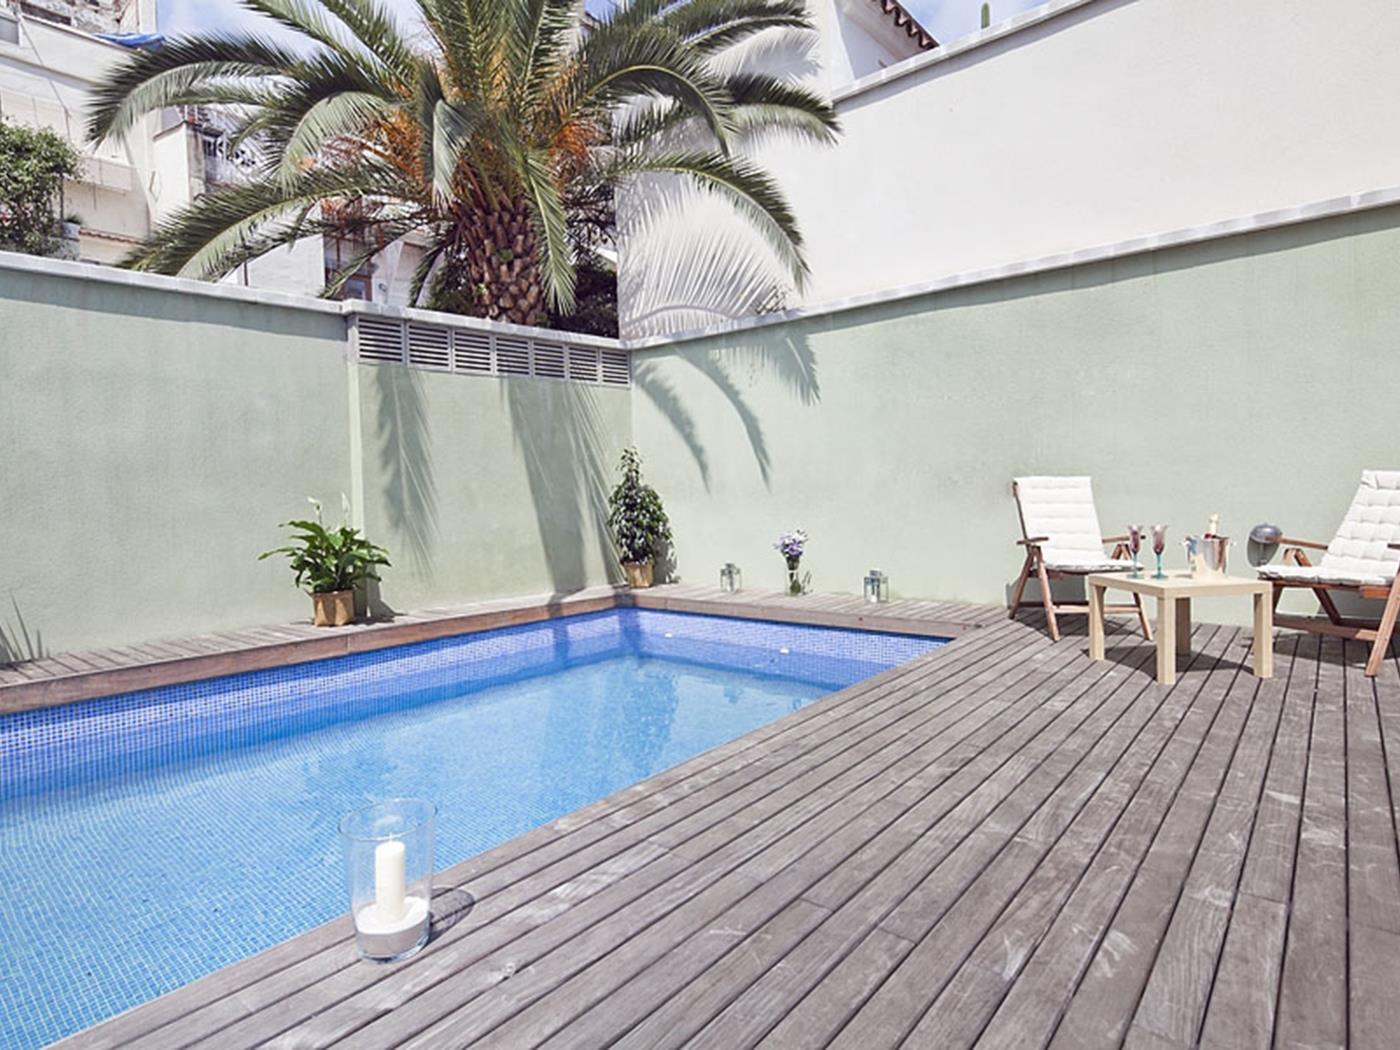 Apartment with Terrace and Pool in Sagrada Familia - My Space Barcelona Mieszkanie